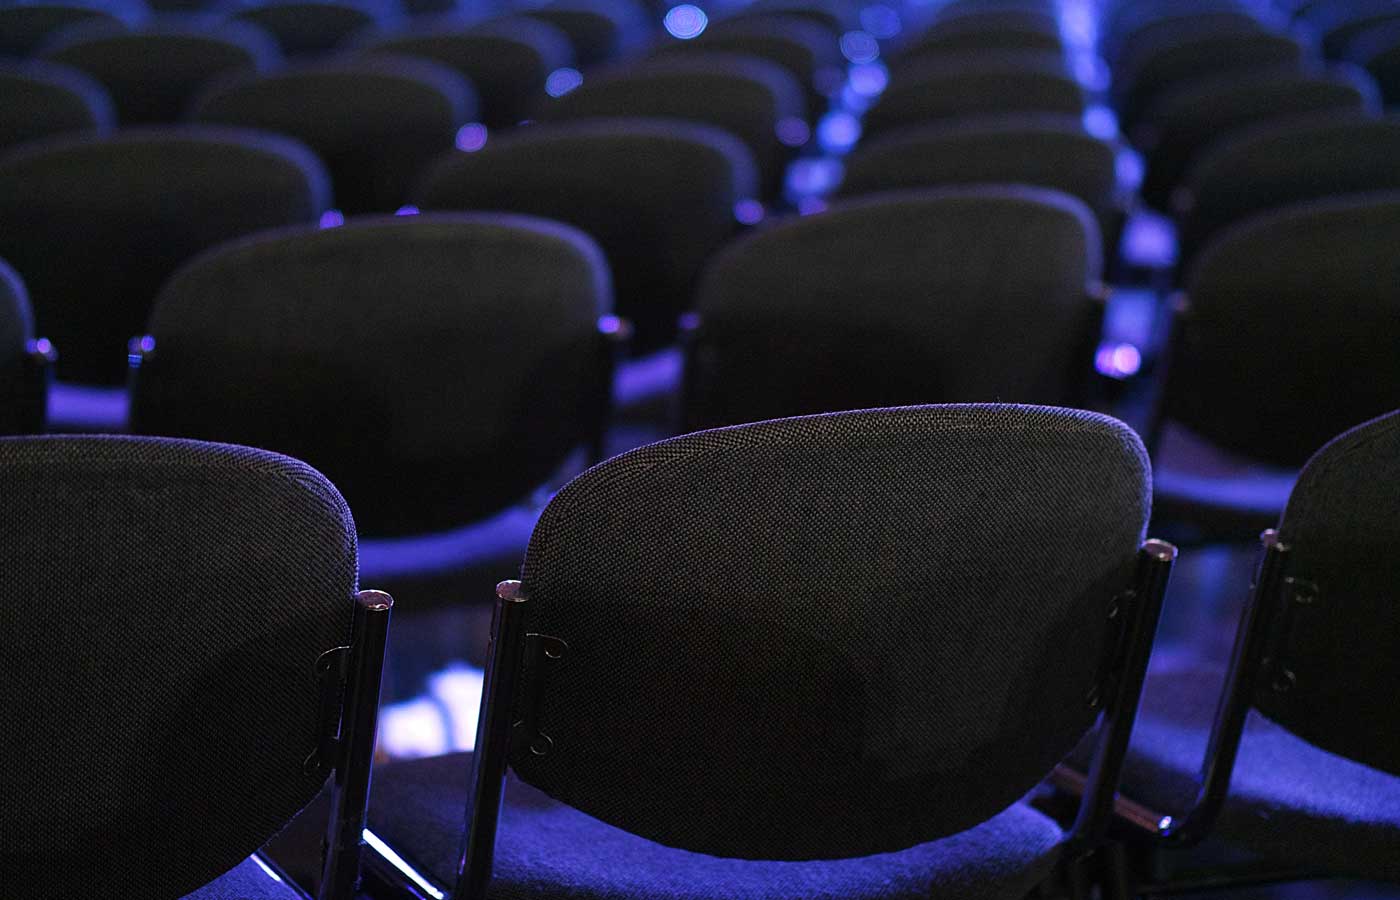 corporate event planning guide - Shows rows of empty chairs at a conference